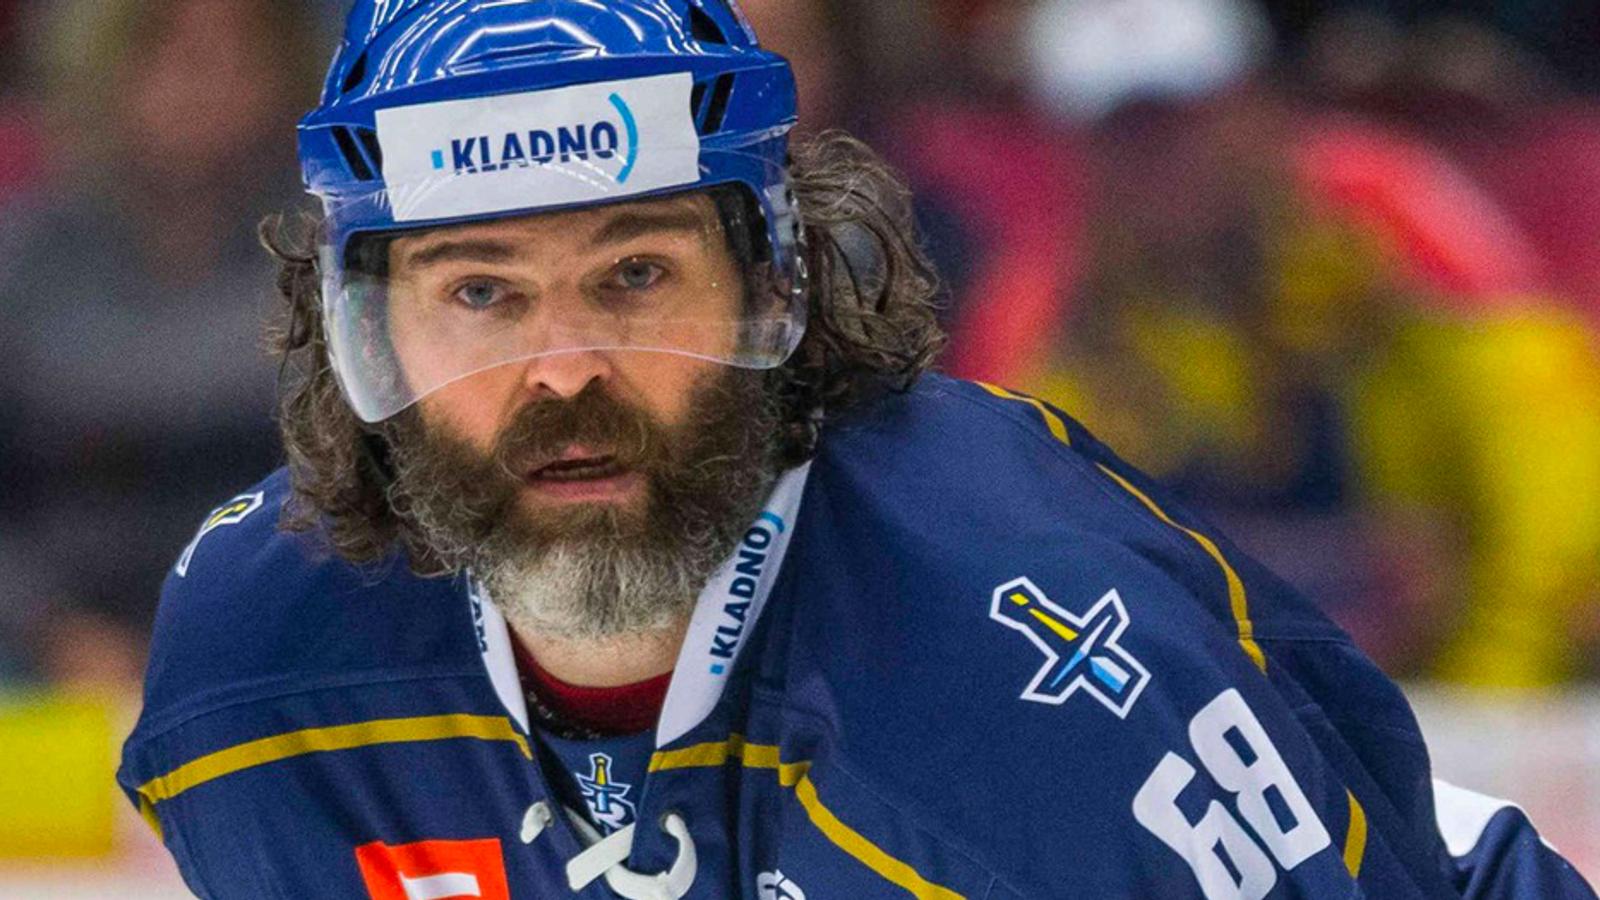 Jaromir Jagr says he has “no choice” but to play for hometown team Kladno this season or the team will fold